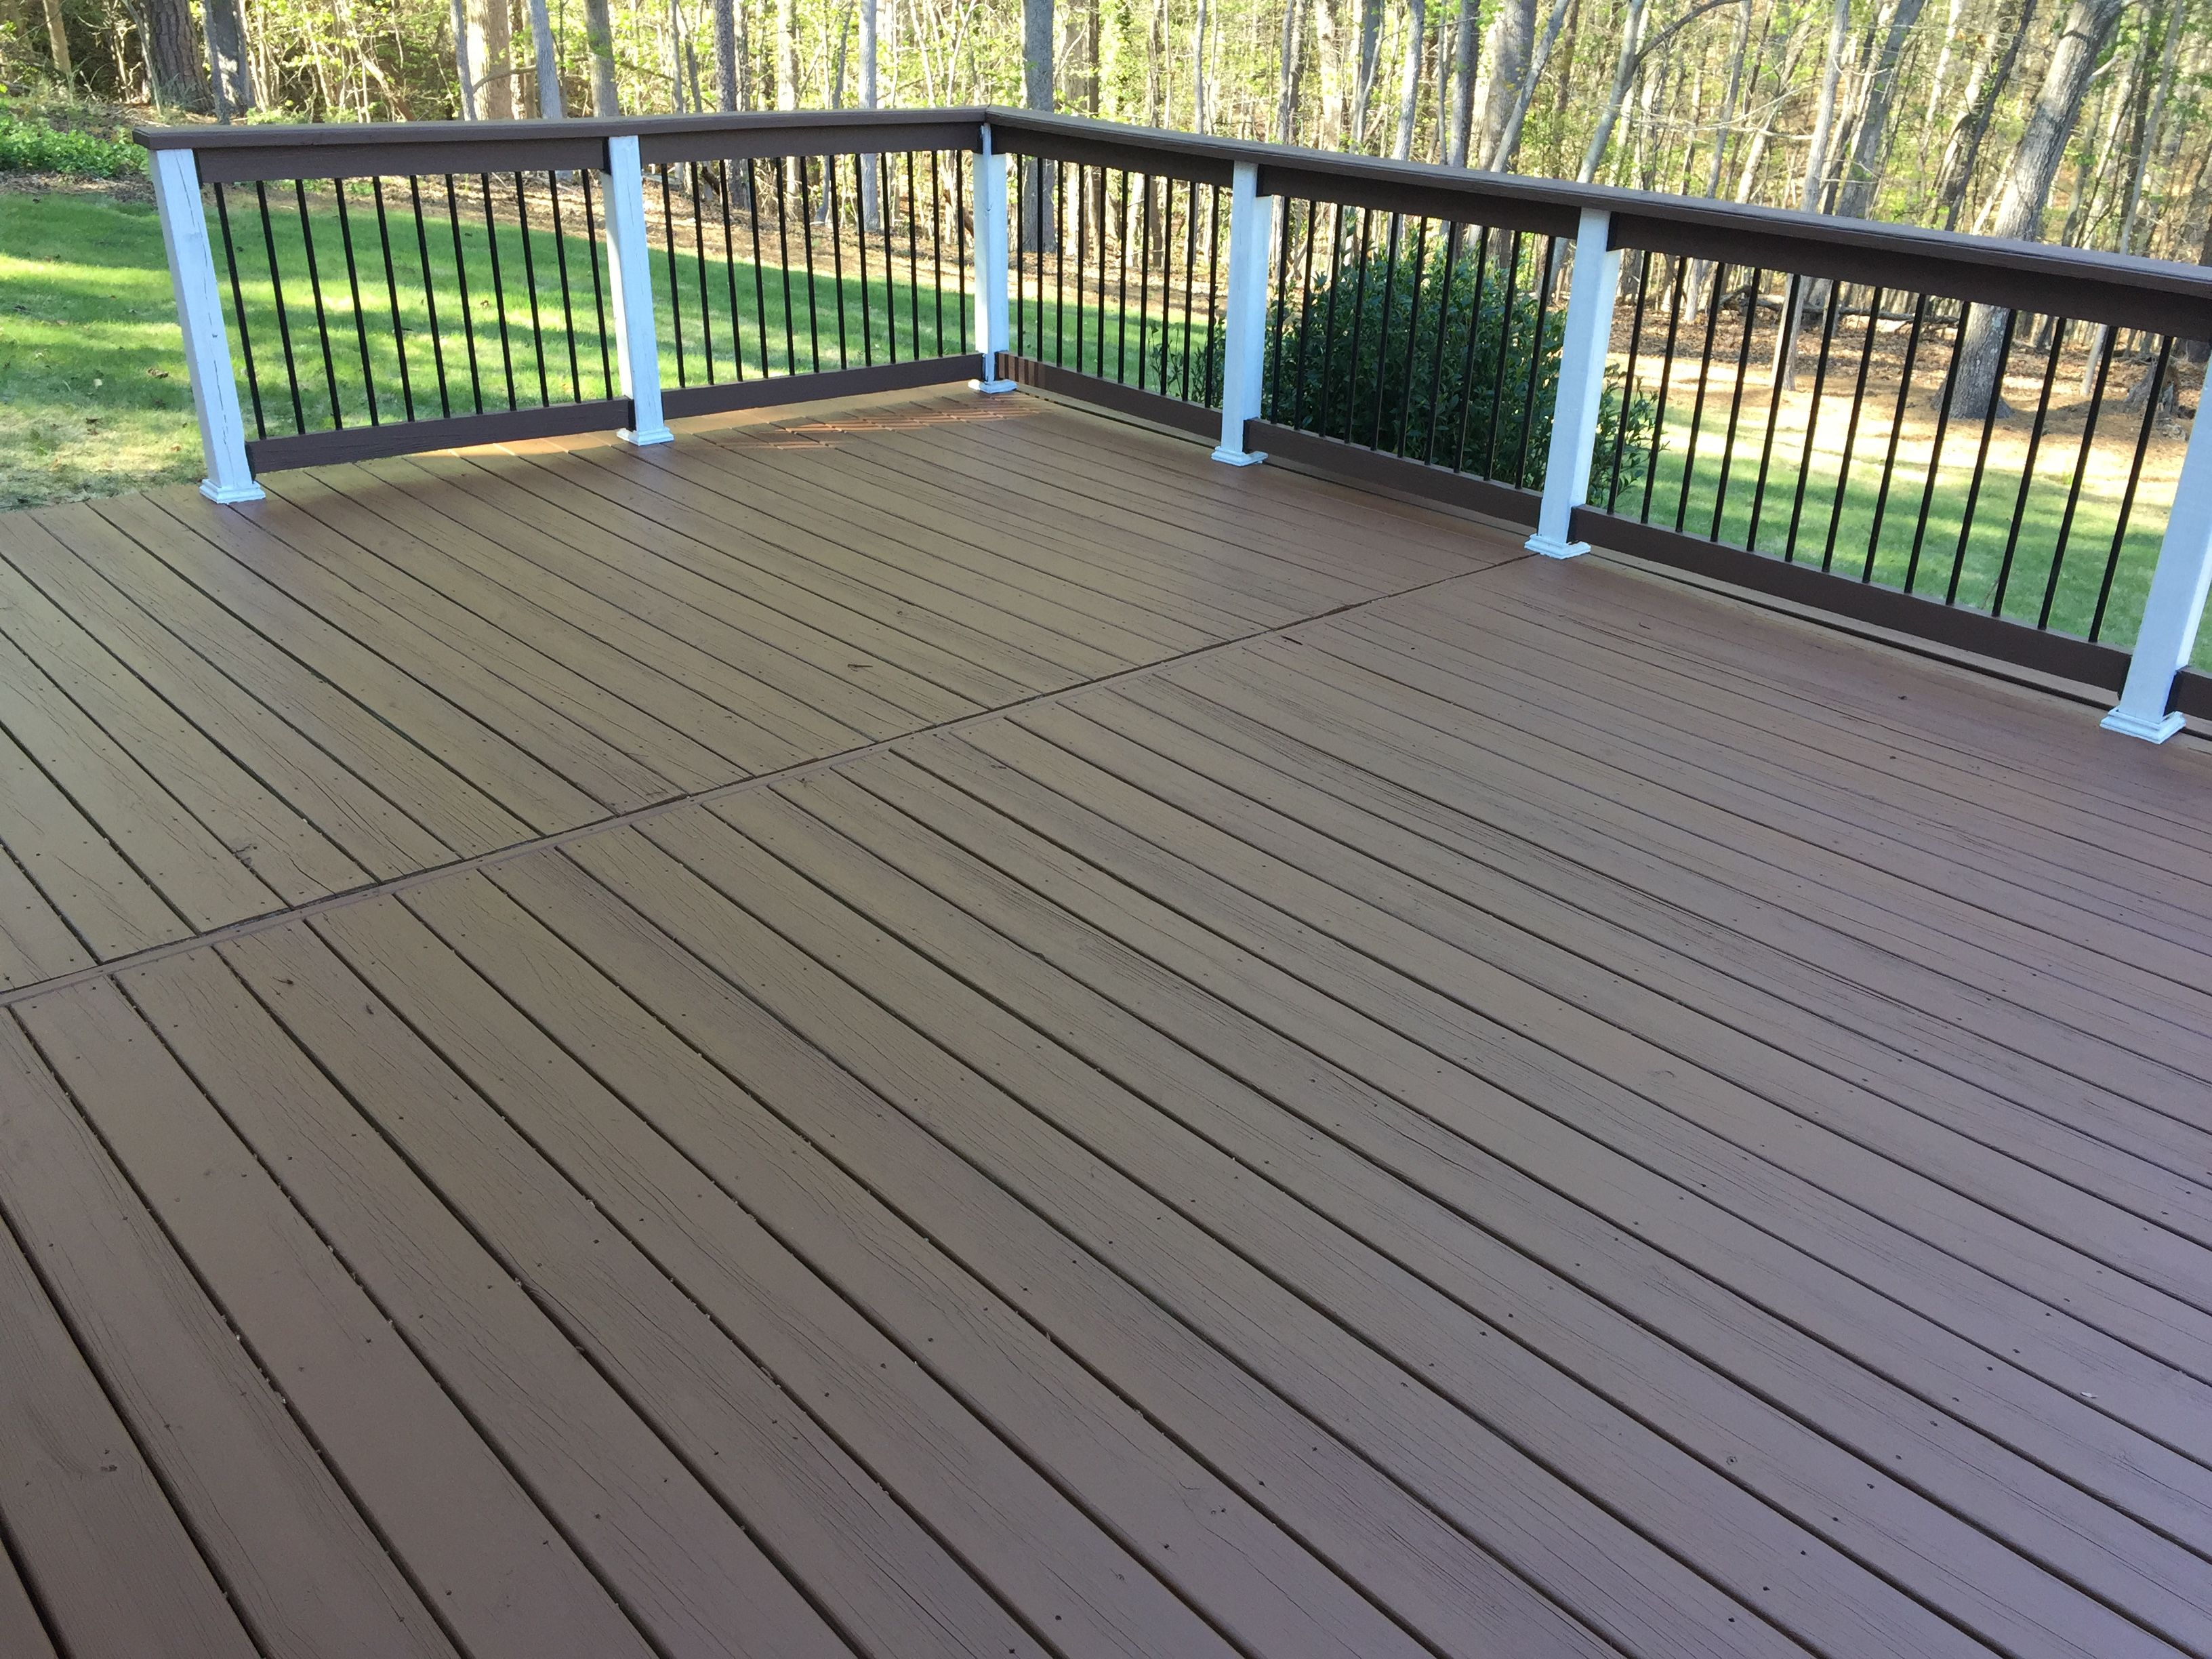 Did The Deck Today And Love The Double Shade Deck Paint Colors Behr in dimensions 3264 X 2448